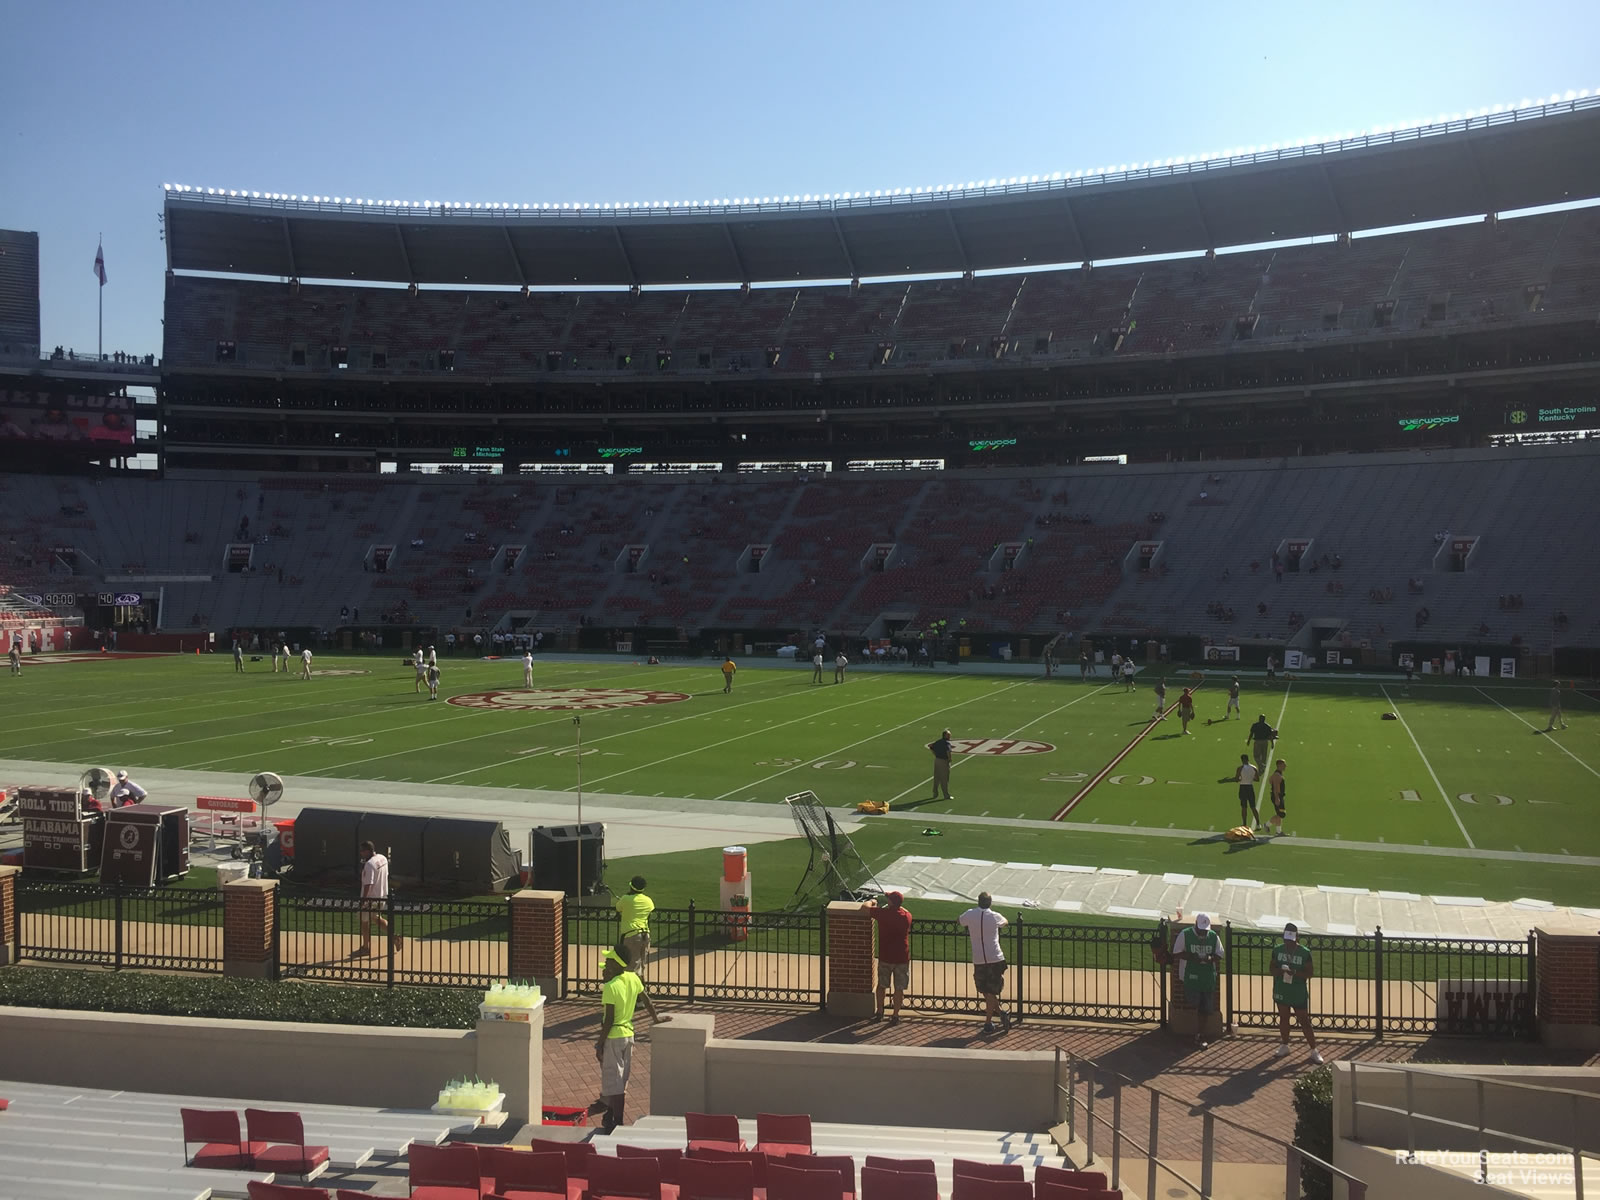 section d, row 20 seat view  - bryant-denny stadium